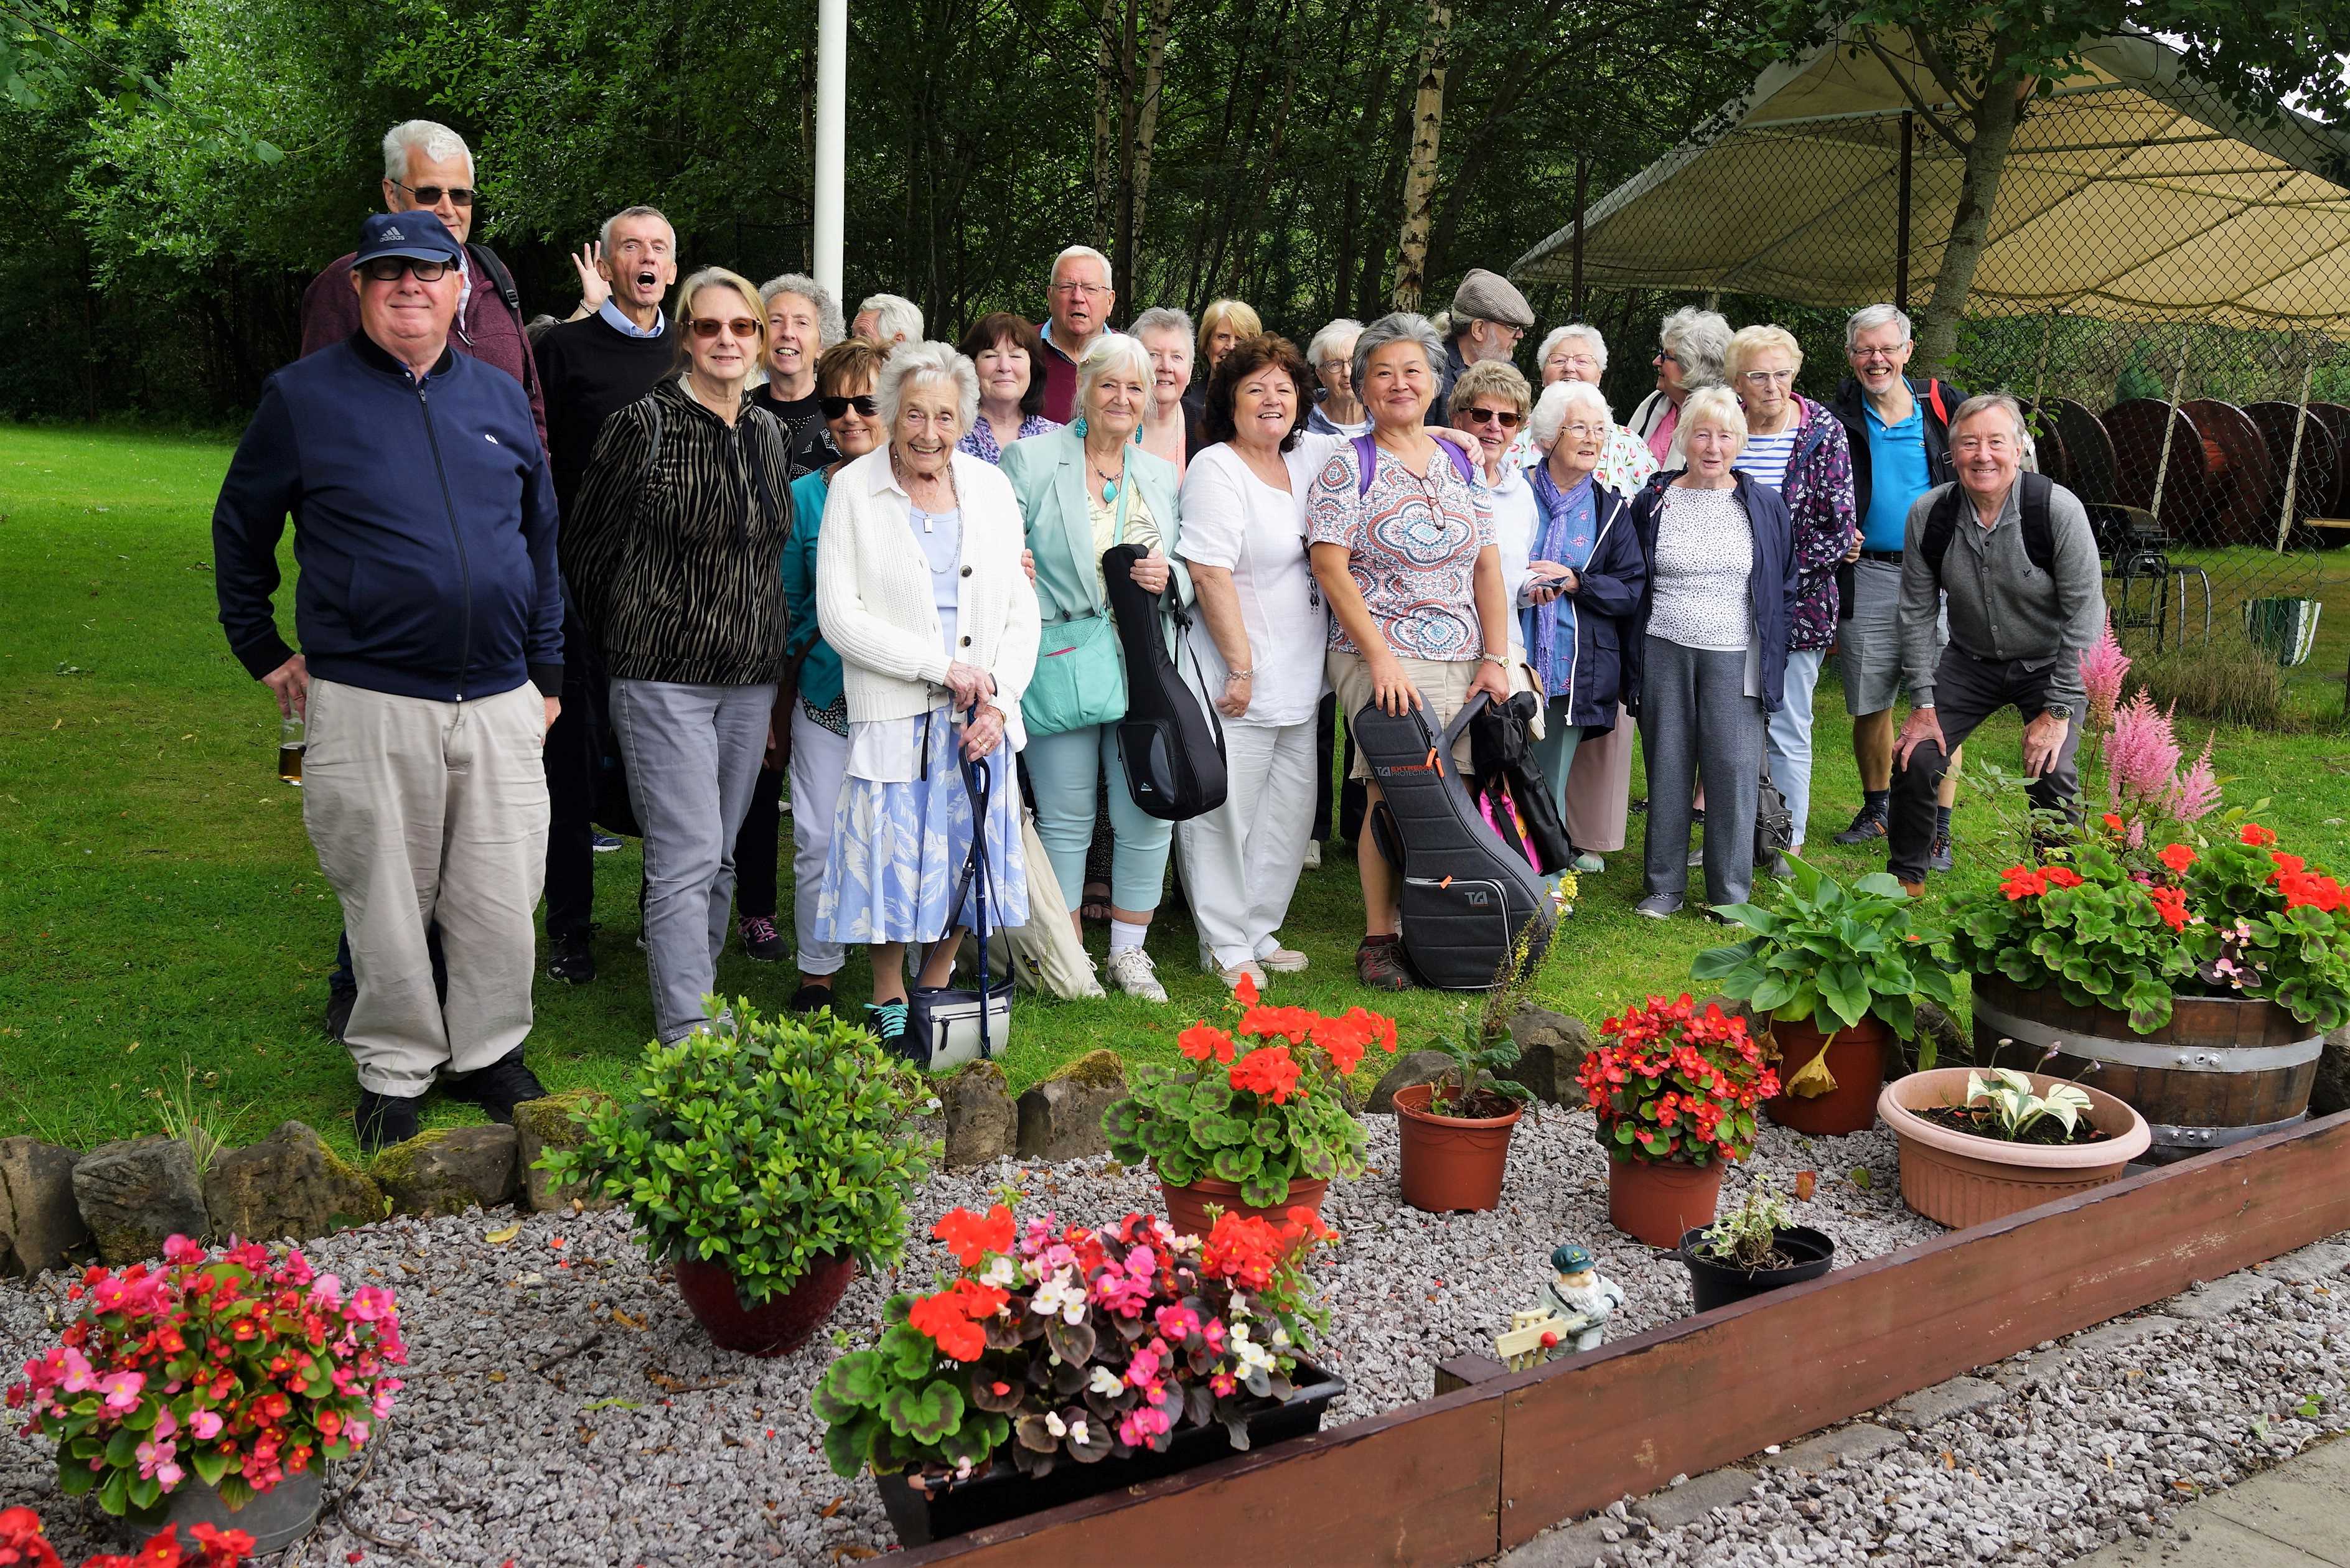 P&D u3a members with picnic players